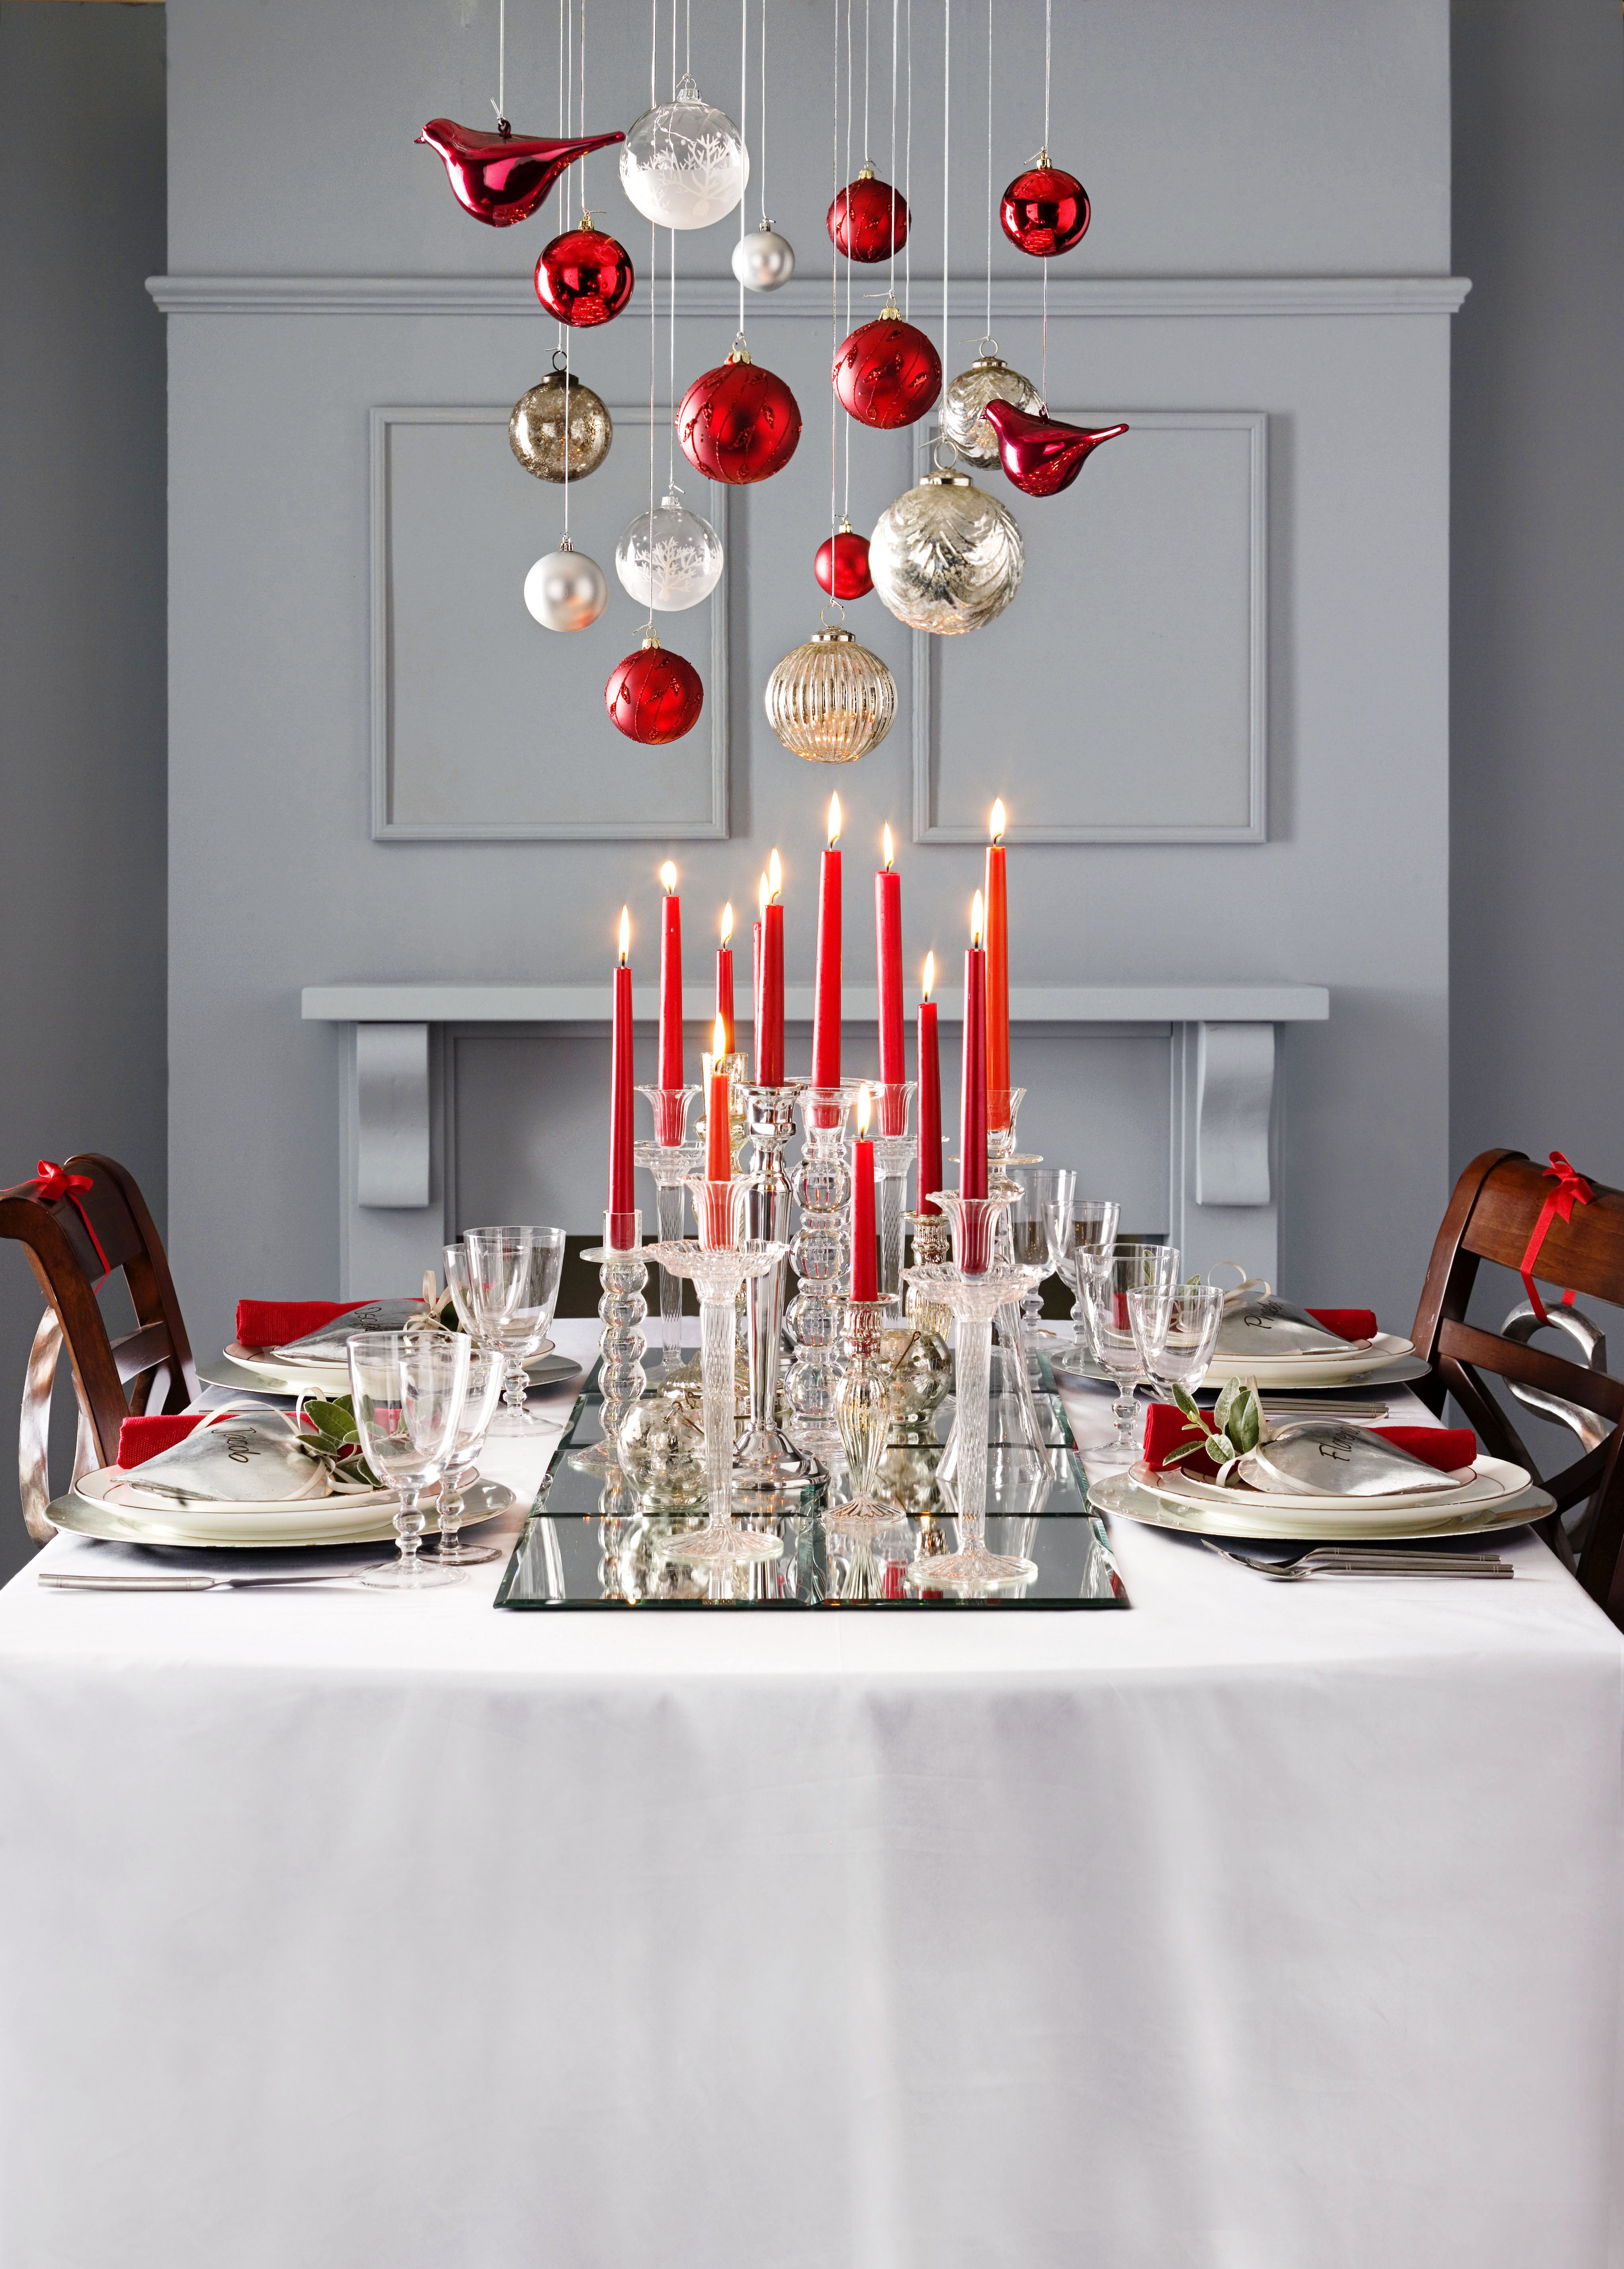 53 Diy Christmas Table Settings And Decorations Centerpieces Ideas For Your Christmas Table